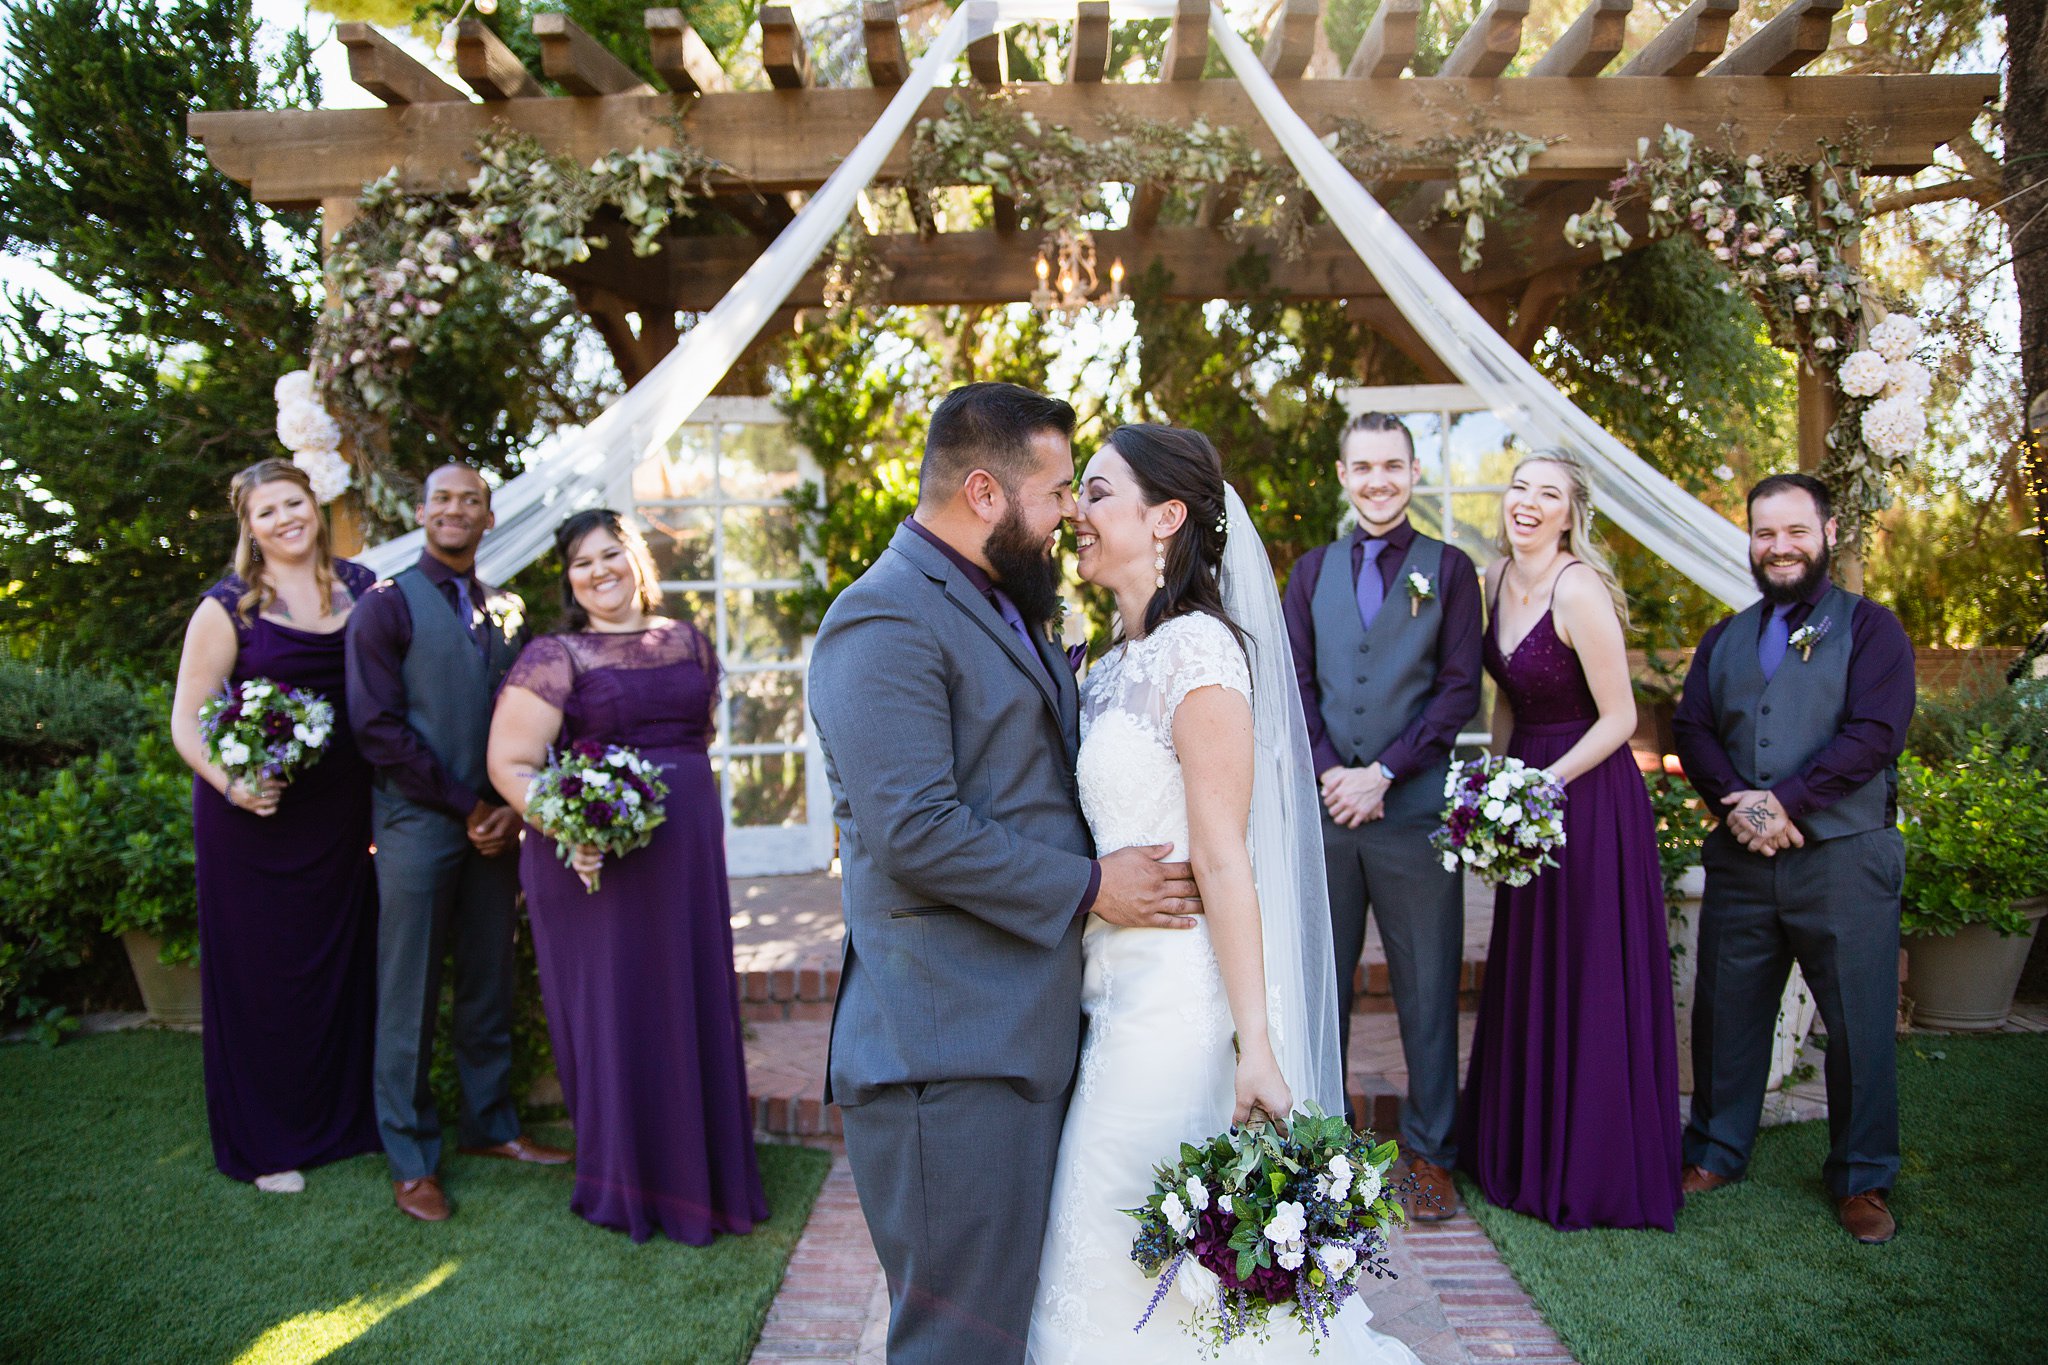 Bride and groom with bridal party at their purple and grey rustic wedding at Schnepf Farms by Arizona wedding photographer PMA Photography.